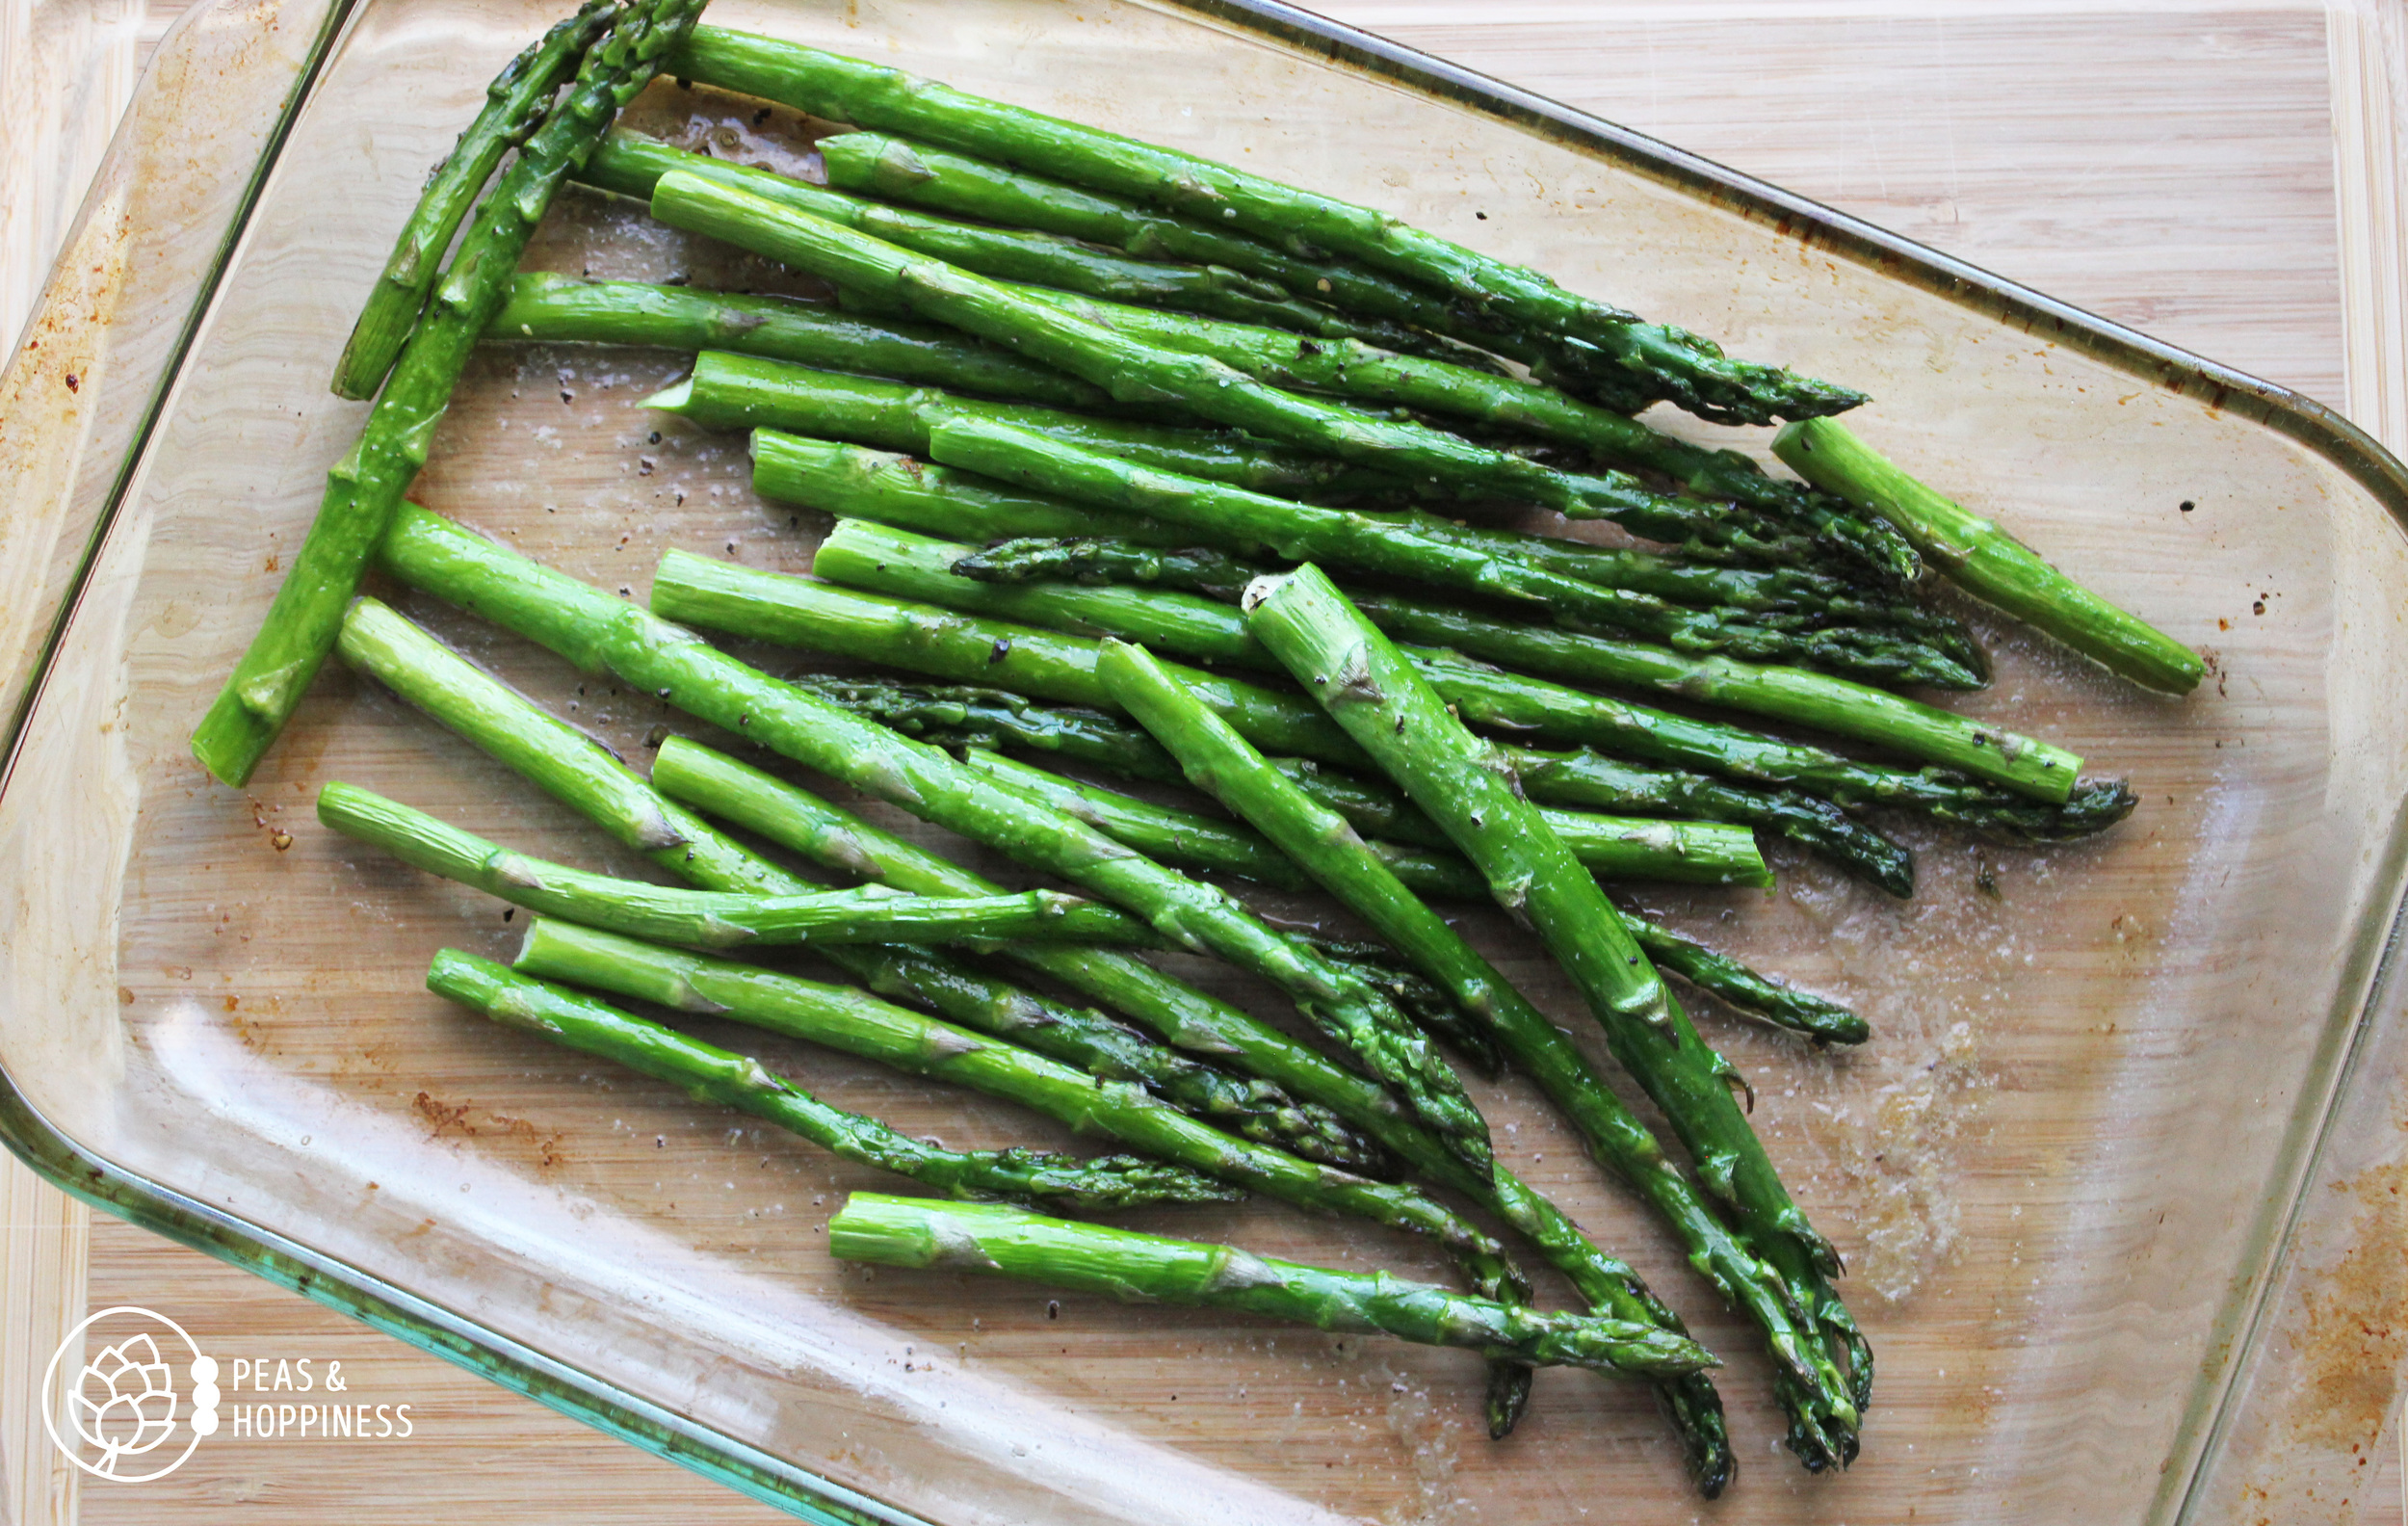 Roasted Asparagus from Peas and Hoppiness - www.peasandhoppiness.com